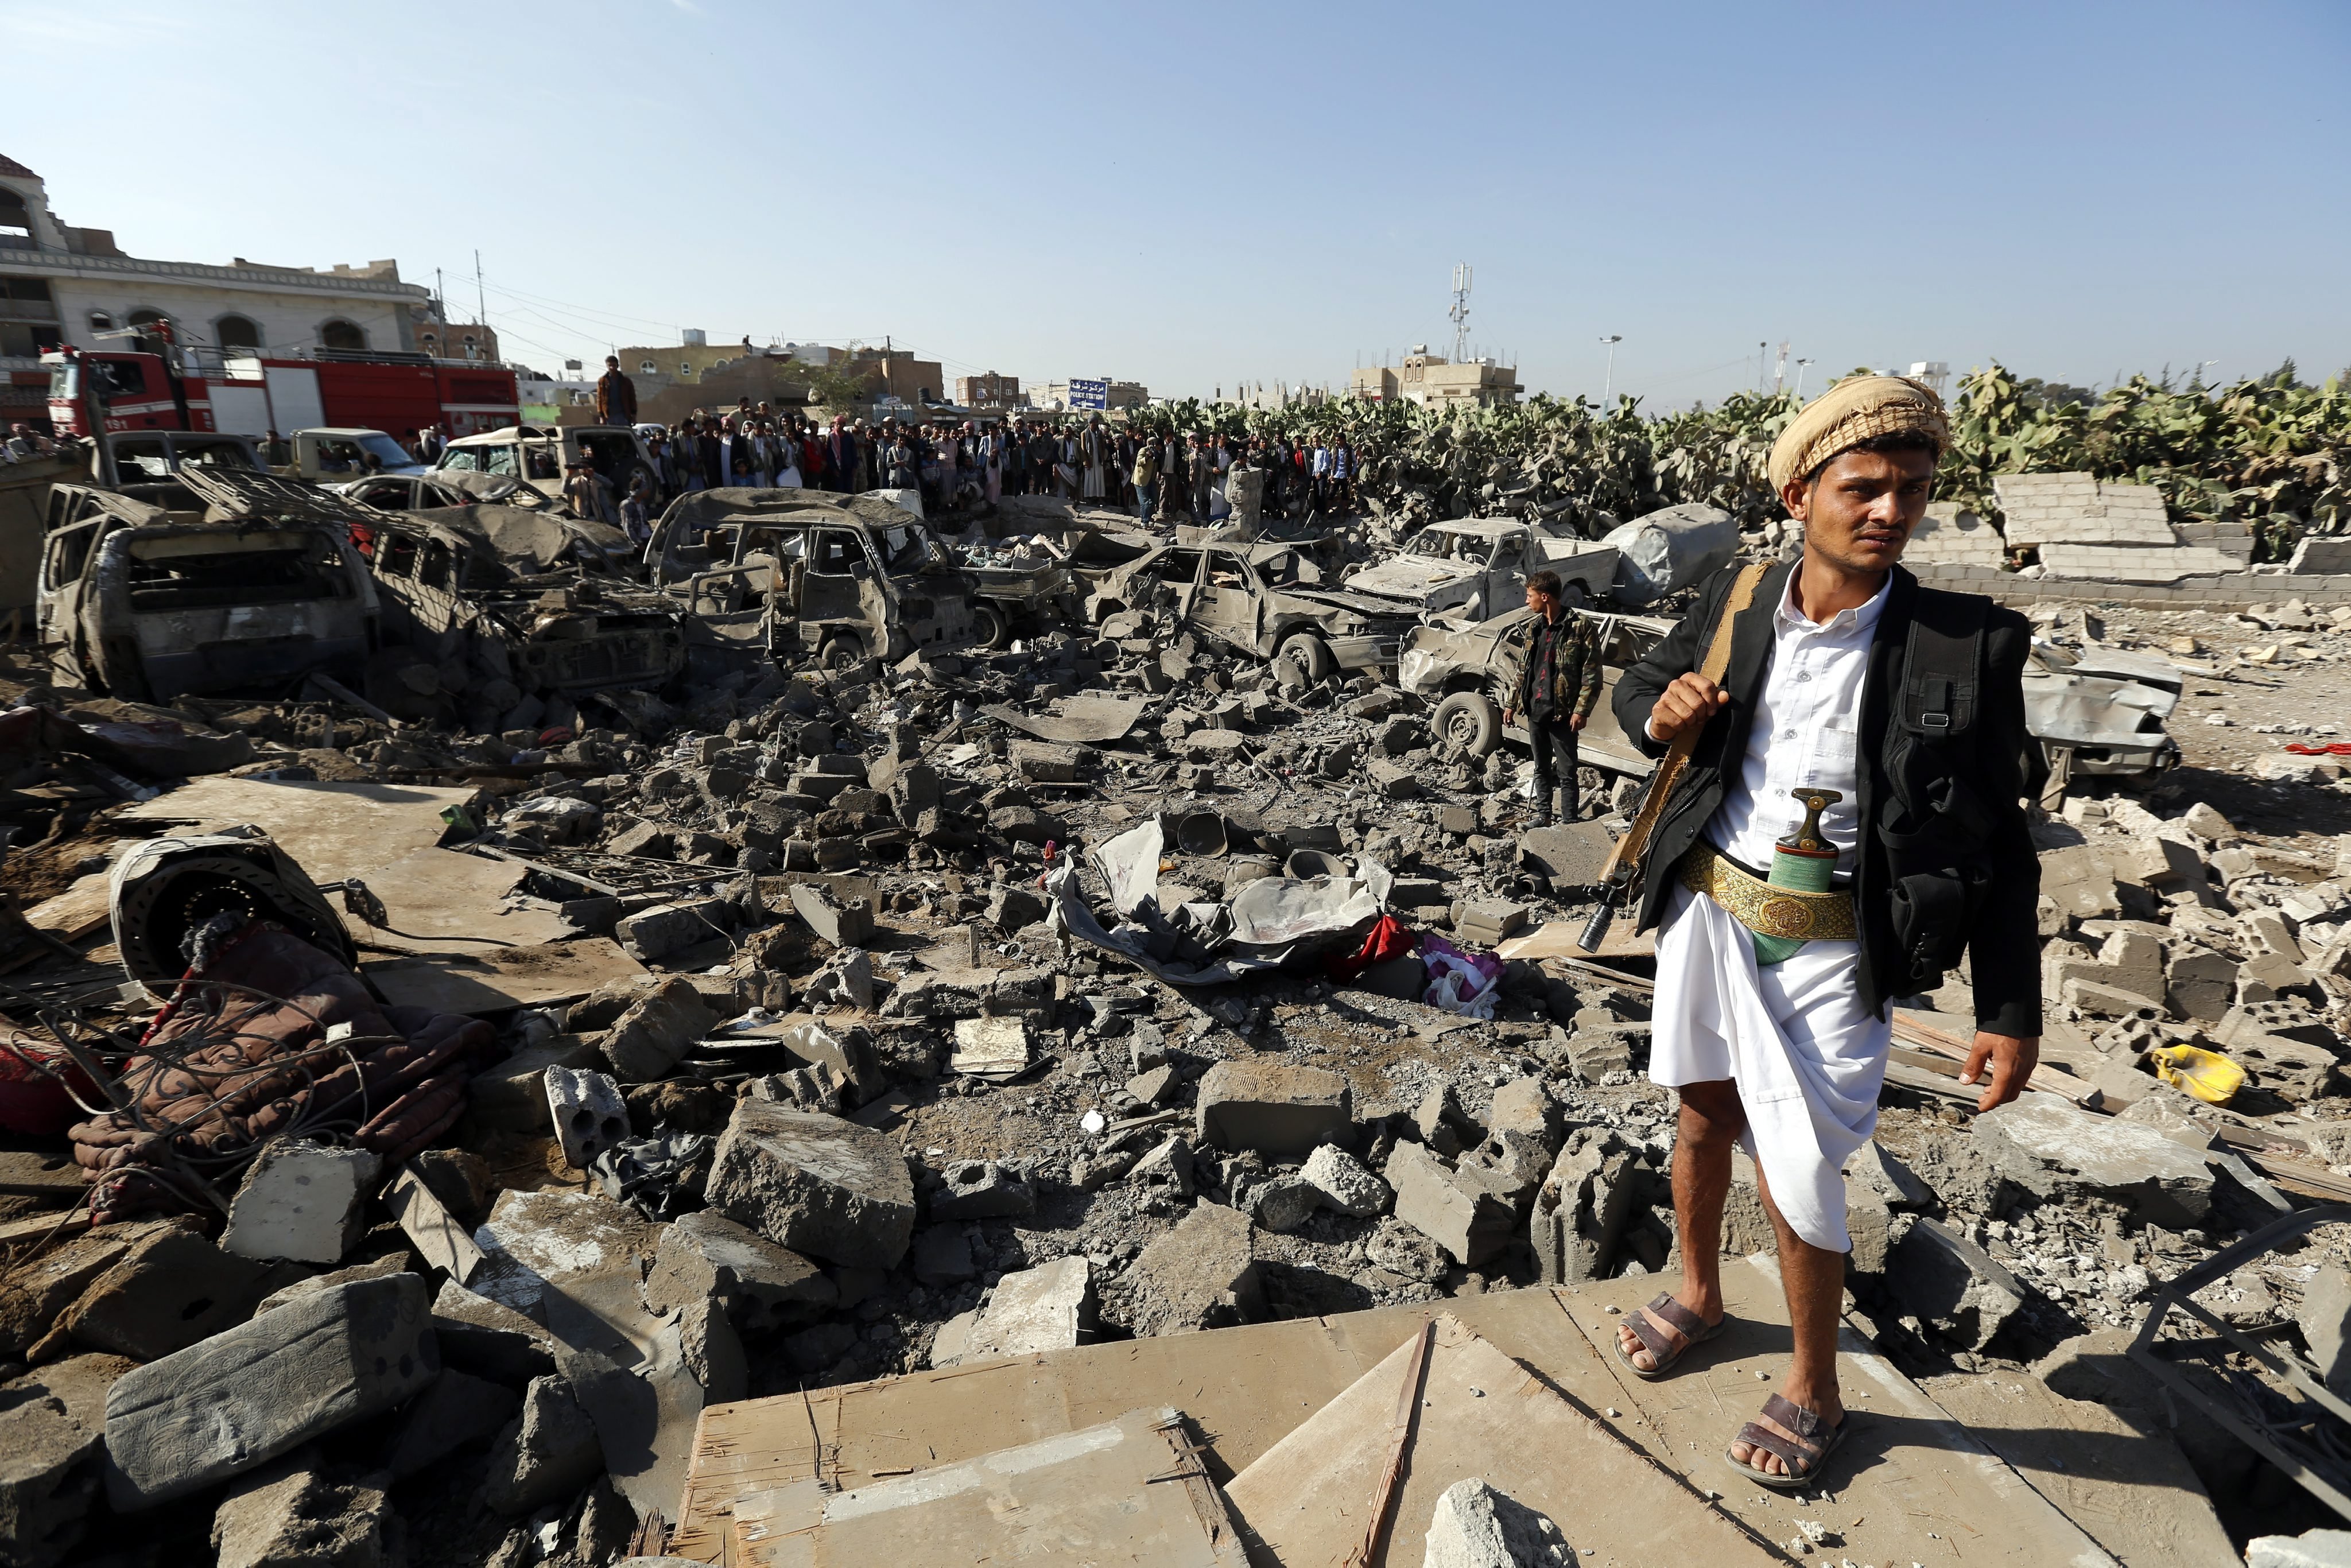 An armed member of Houthi militia keeps watch as people gather beside vehicles which were allegedly destroyed by a Saudi air strike, in Sanaa, Yemen on March 26, 2015. (Yahya Arhab—EPA)